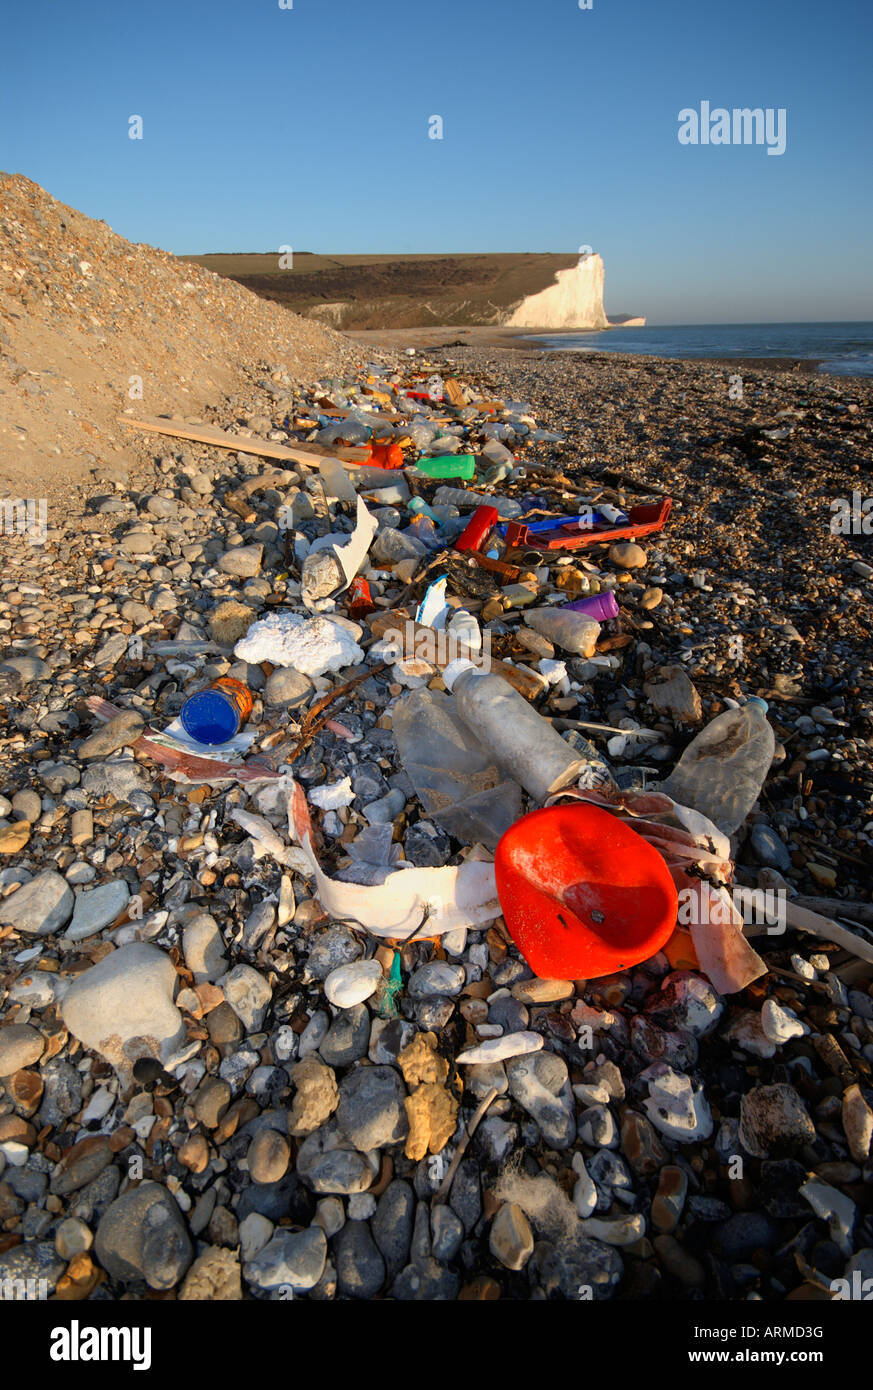 Rubbish and garbage is strewn on the beach at low tide Stock Photo